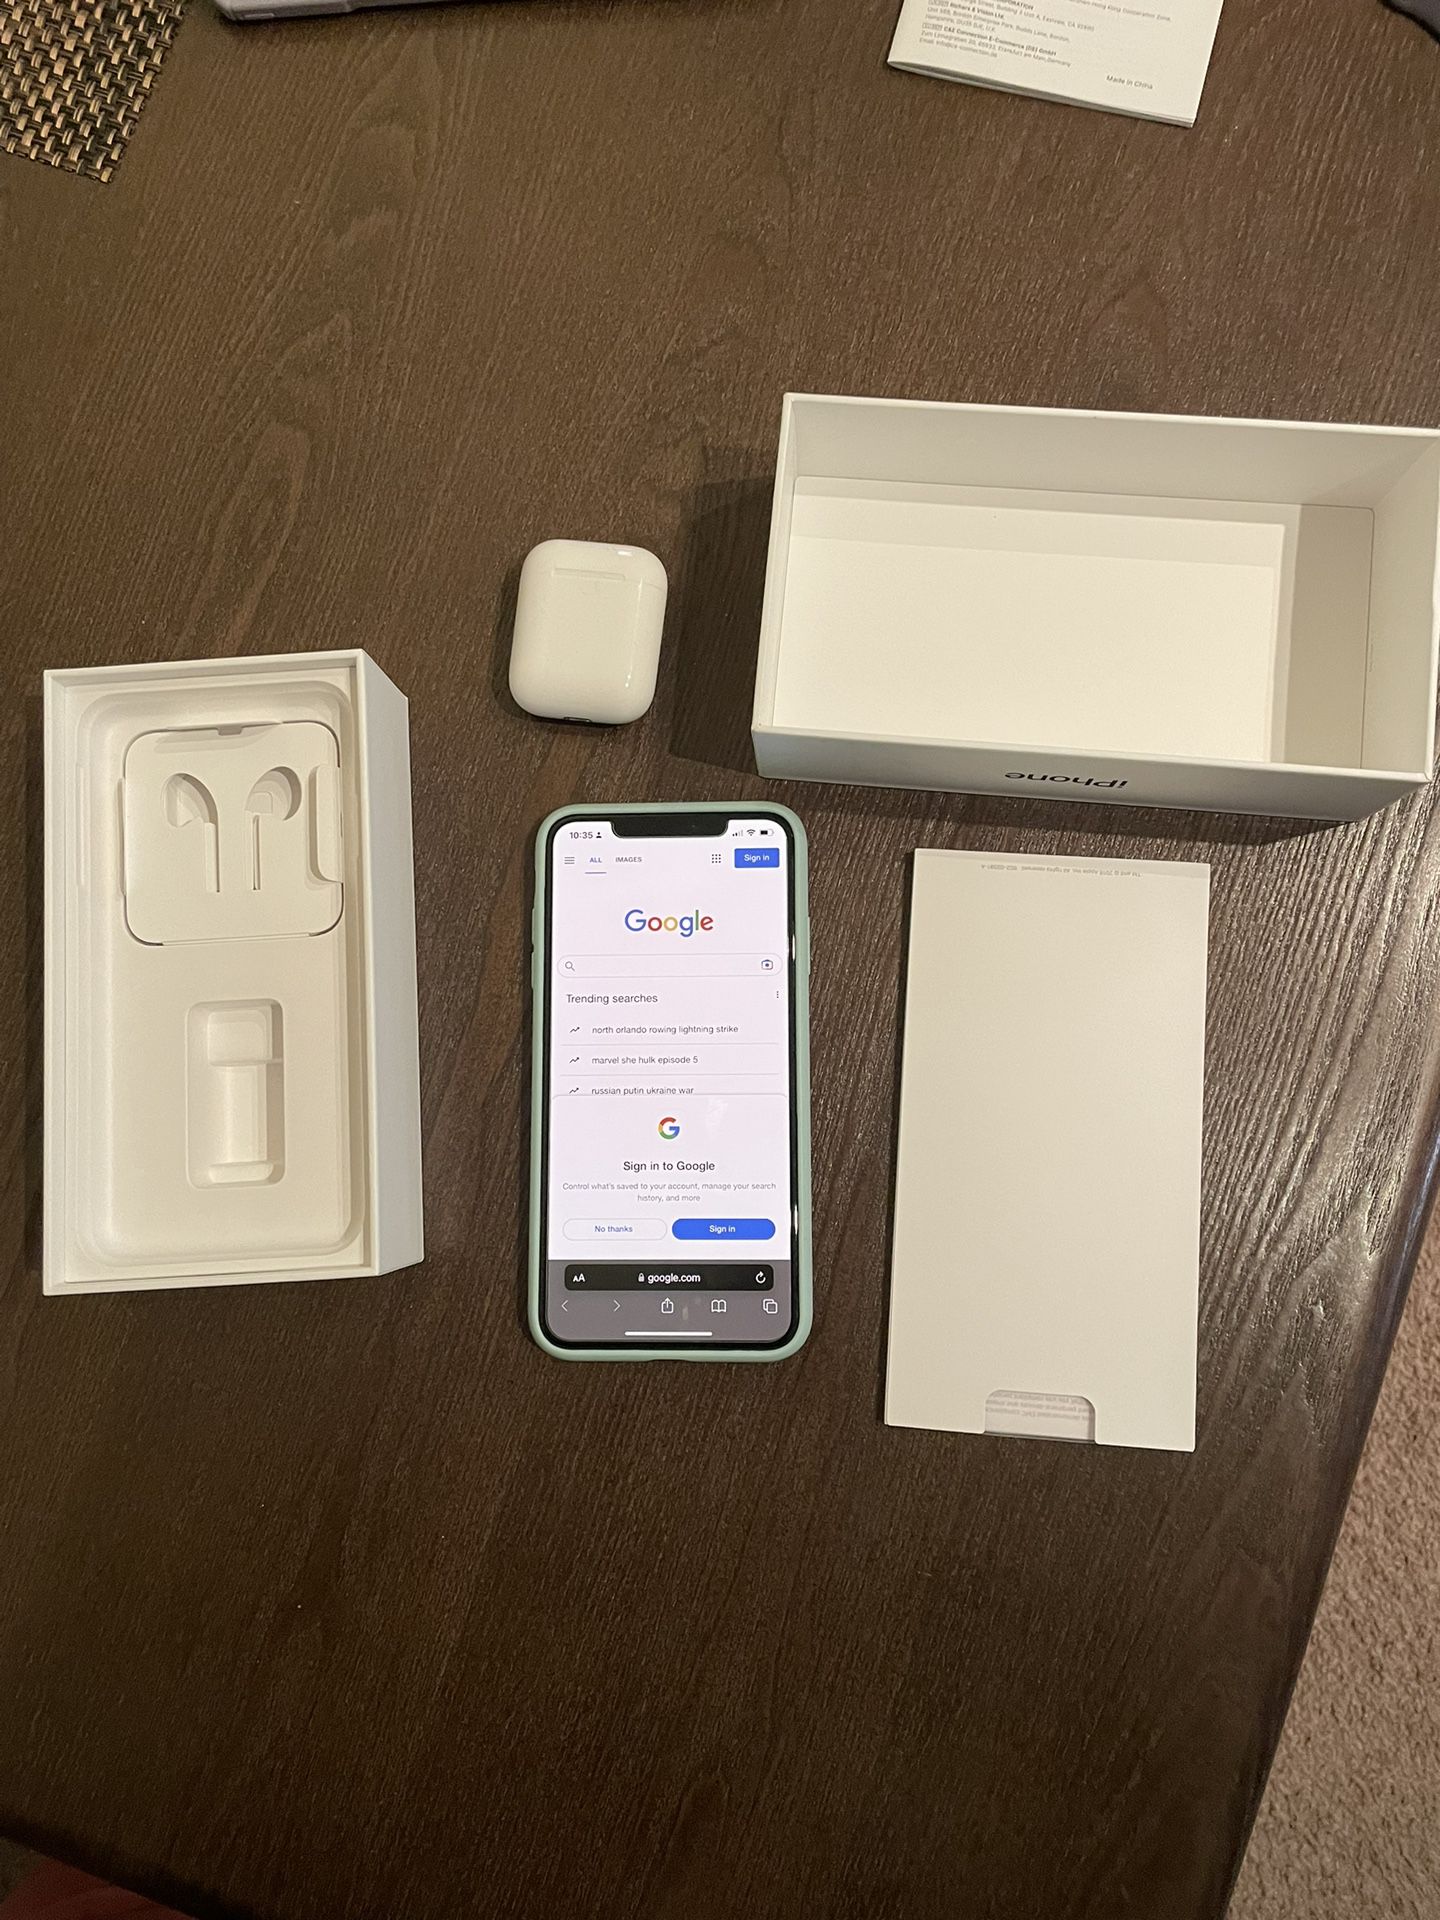 Iphone XS Max 64GB fully unlocked + Air pods 2nd Gen